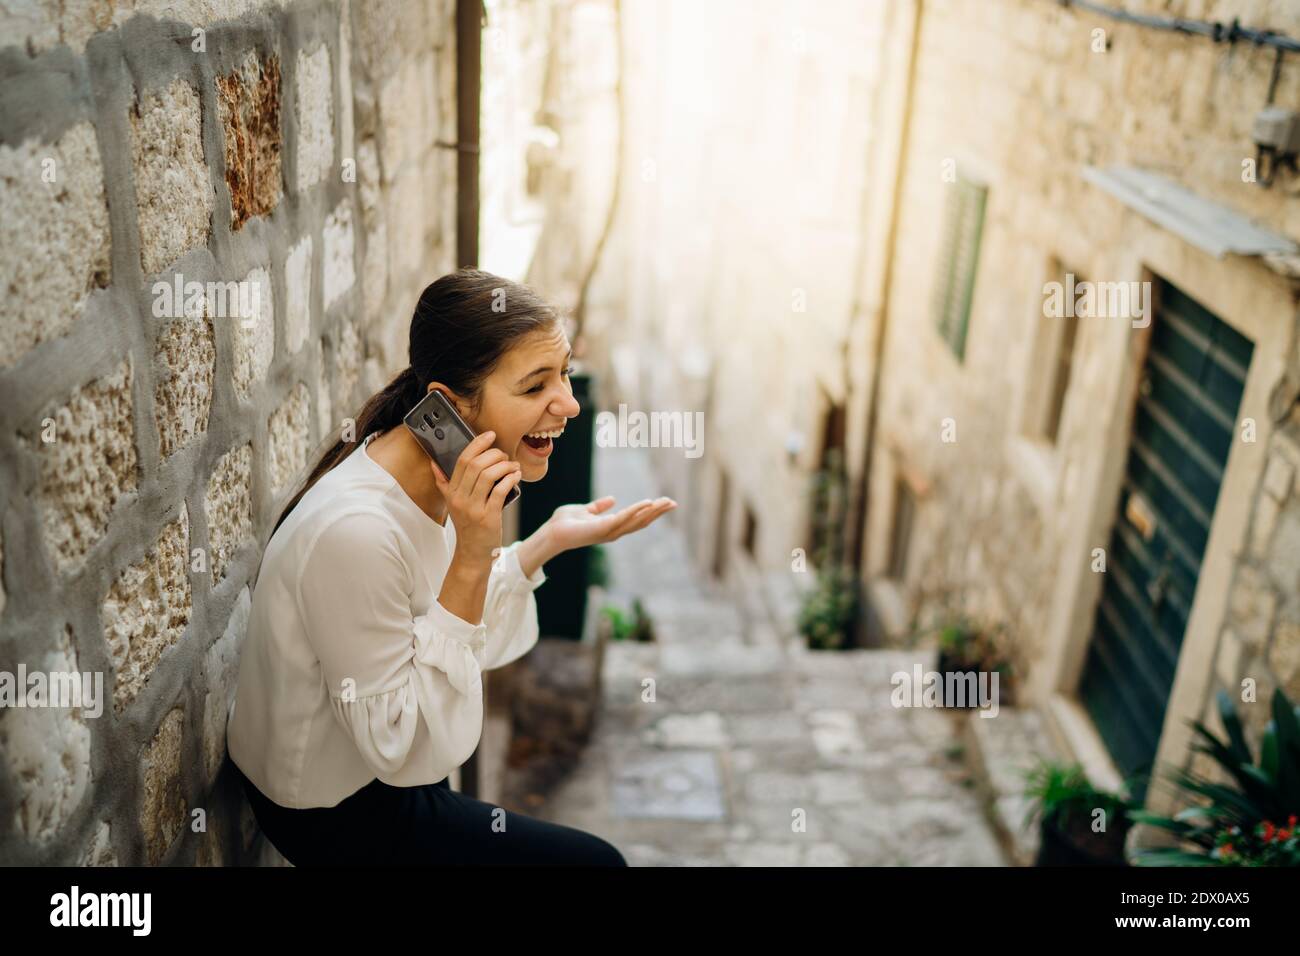 Excited laughing woman having a chat call meeting.Using a social network platform to stay connected.Smartphone app technology for internet communicati Stock Photo